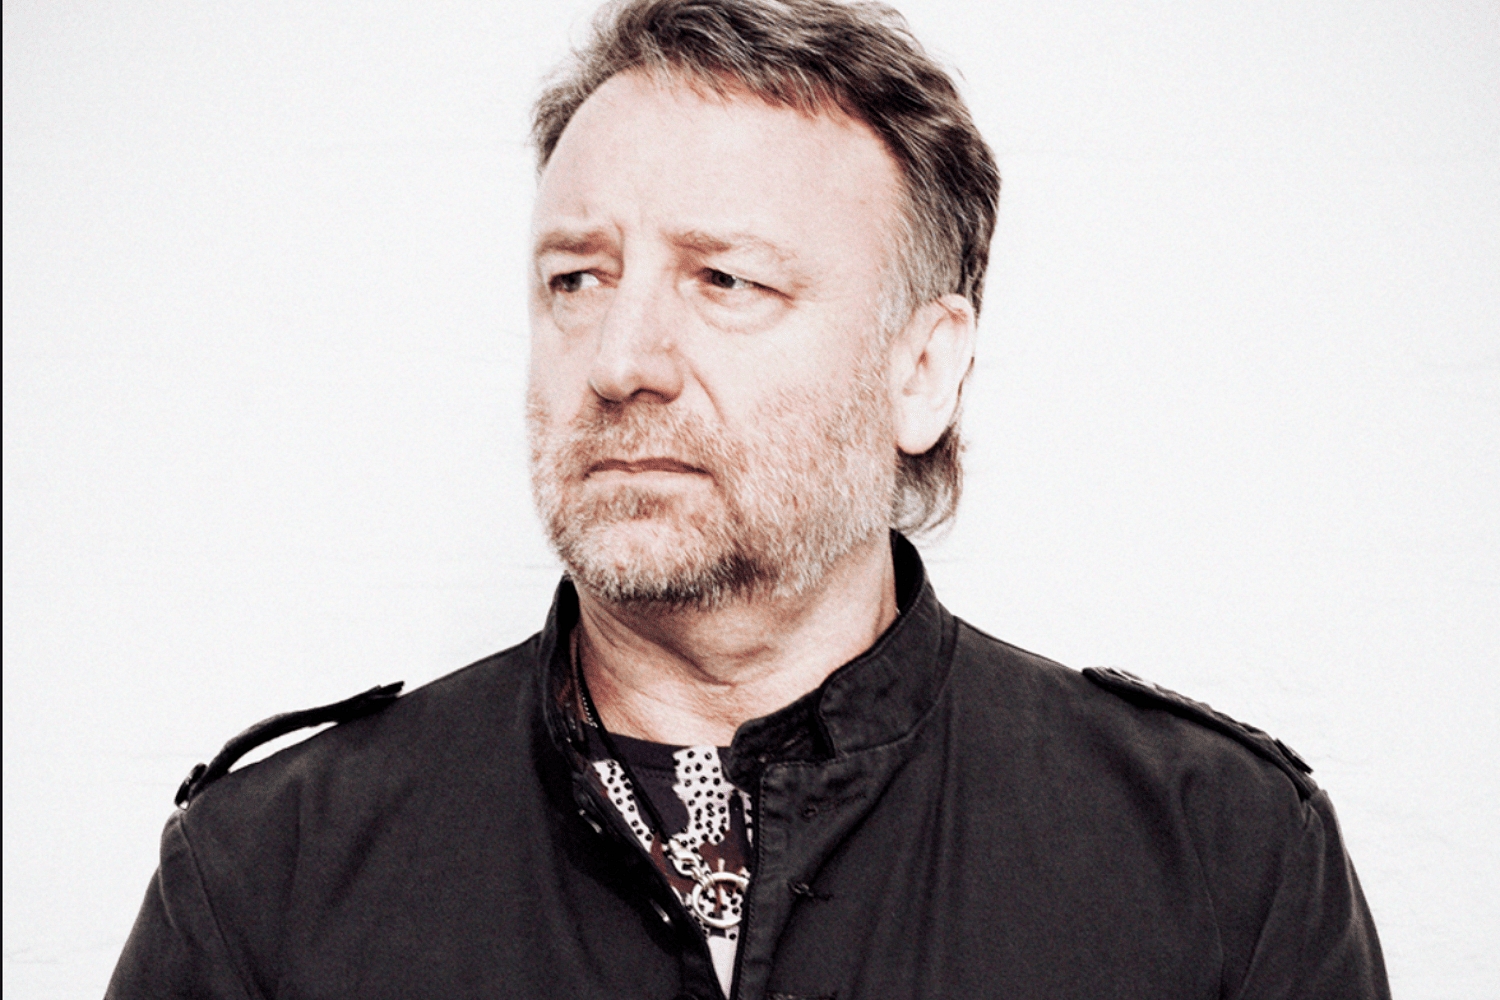 Peter Hook to play Joy Division’s ‘Unknown Pleasures’ and ‘Closer’ in full at special UK shows